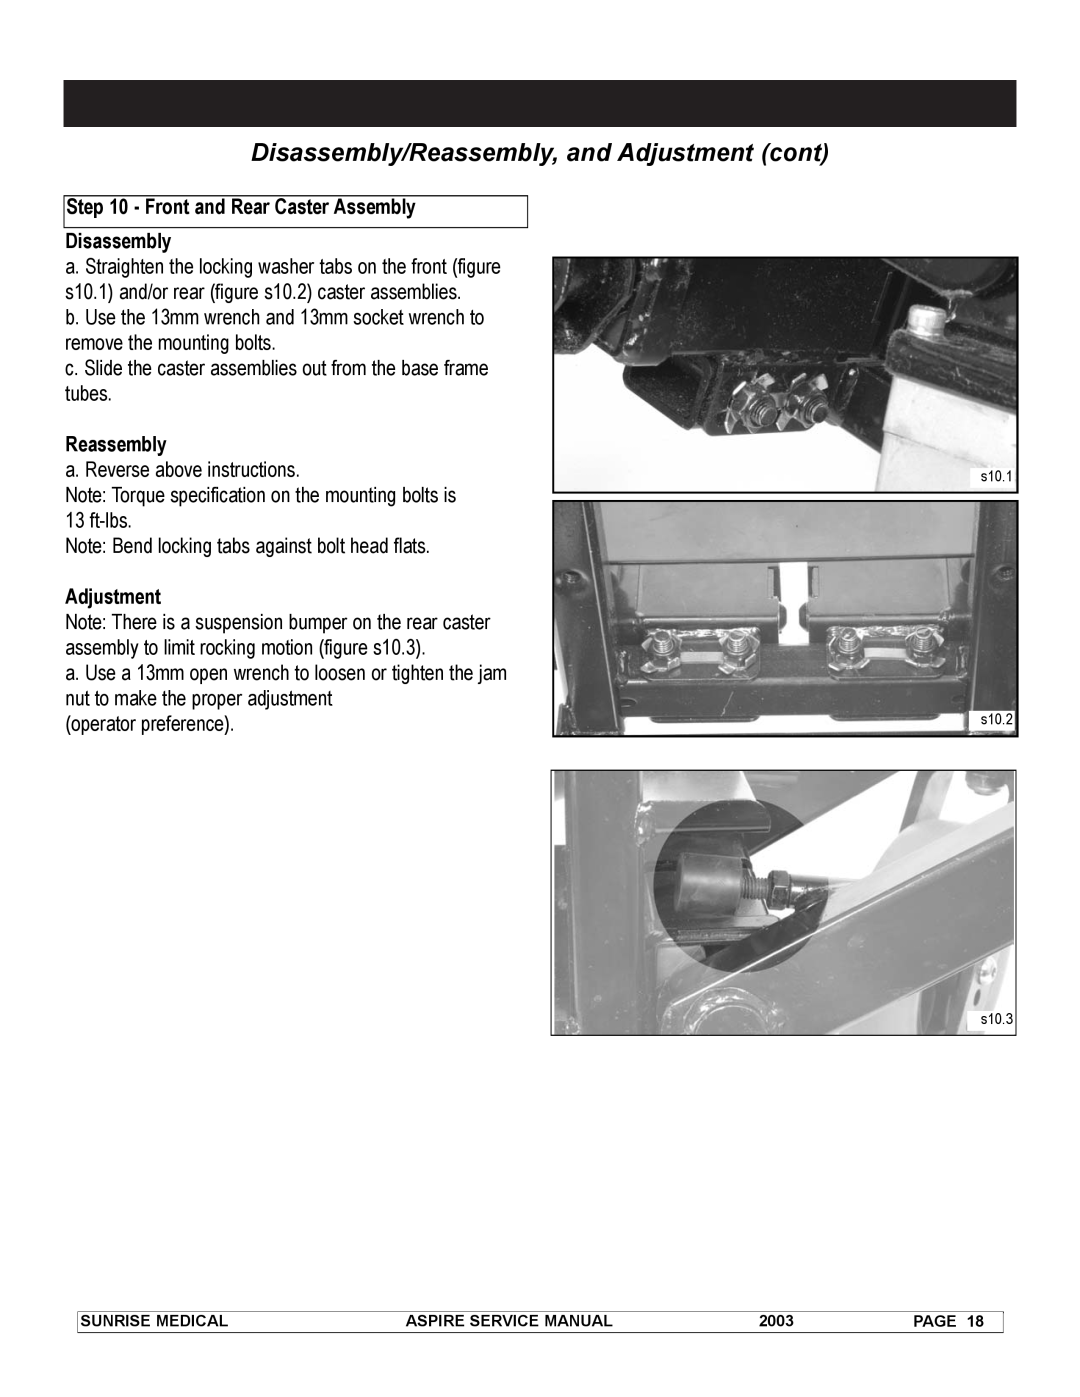 Sunrise Medical 931157 service manual Disassembly/Reassembly, and Adjustment cont, s10.1 s10.2 s10.3 